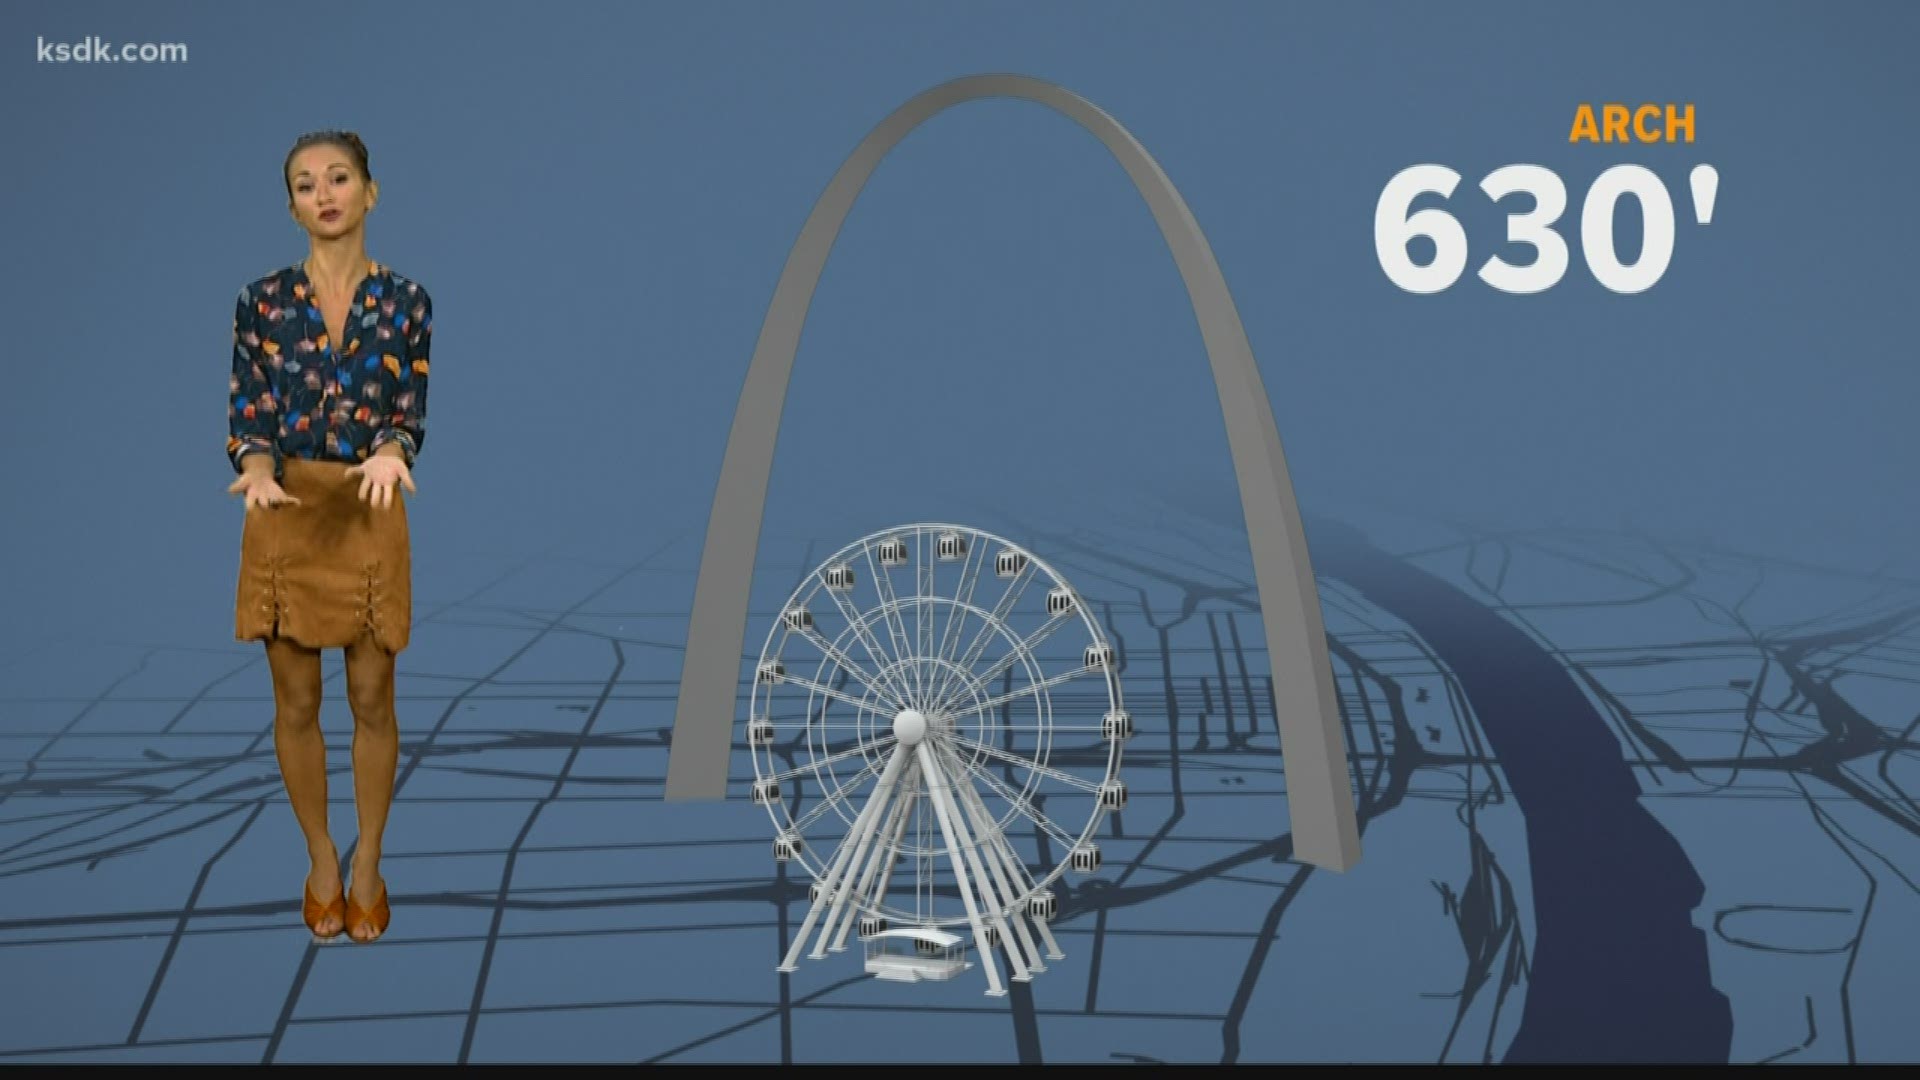 The St. Louis Wheel opens to the public on Monday. Abby Llorico shows us what it's all about.